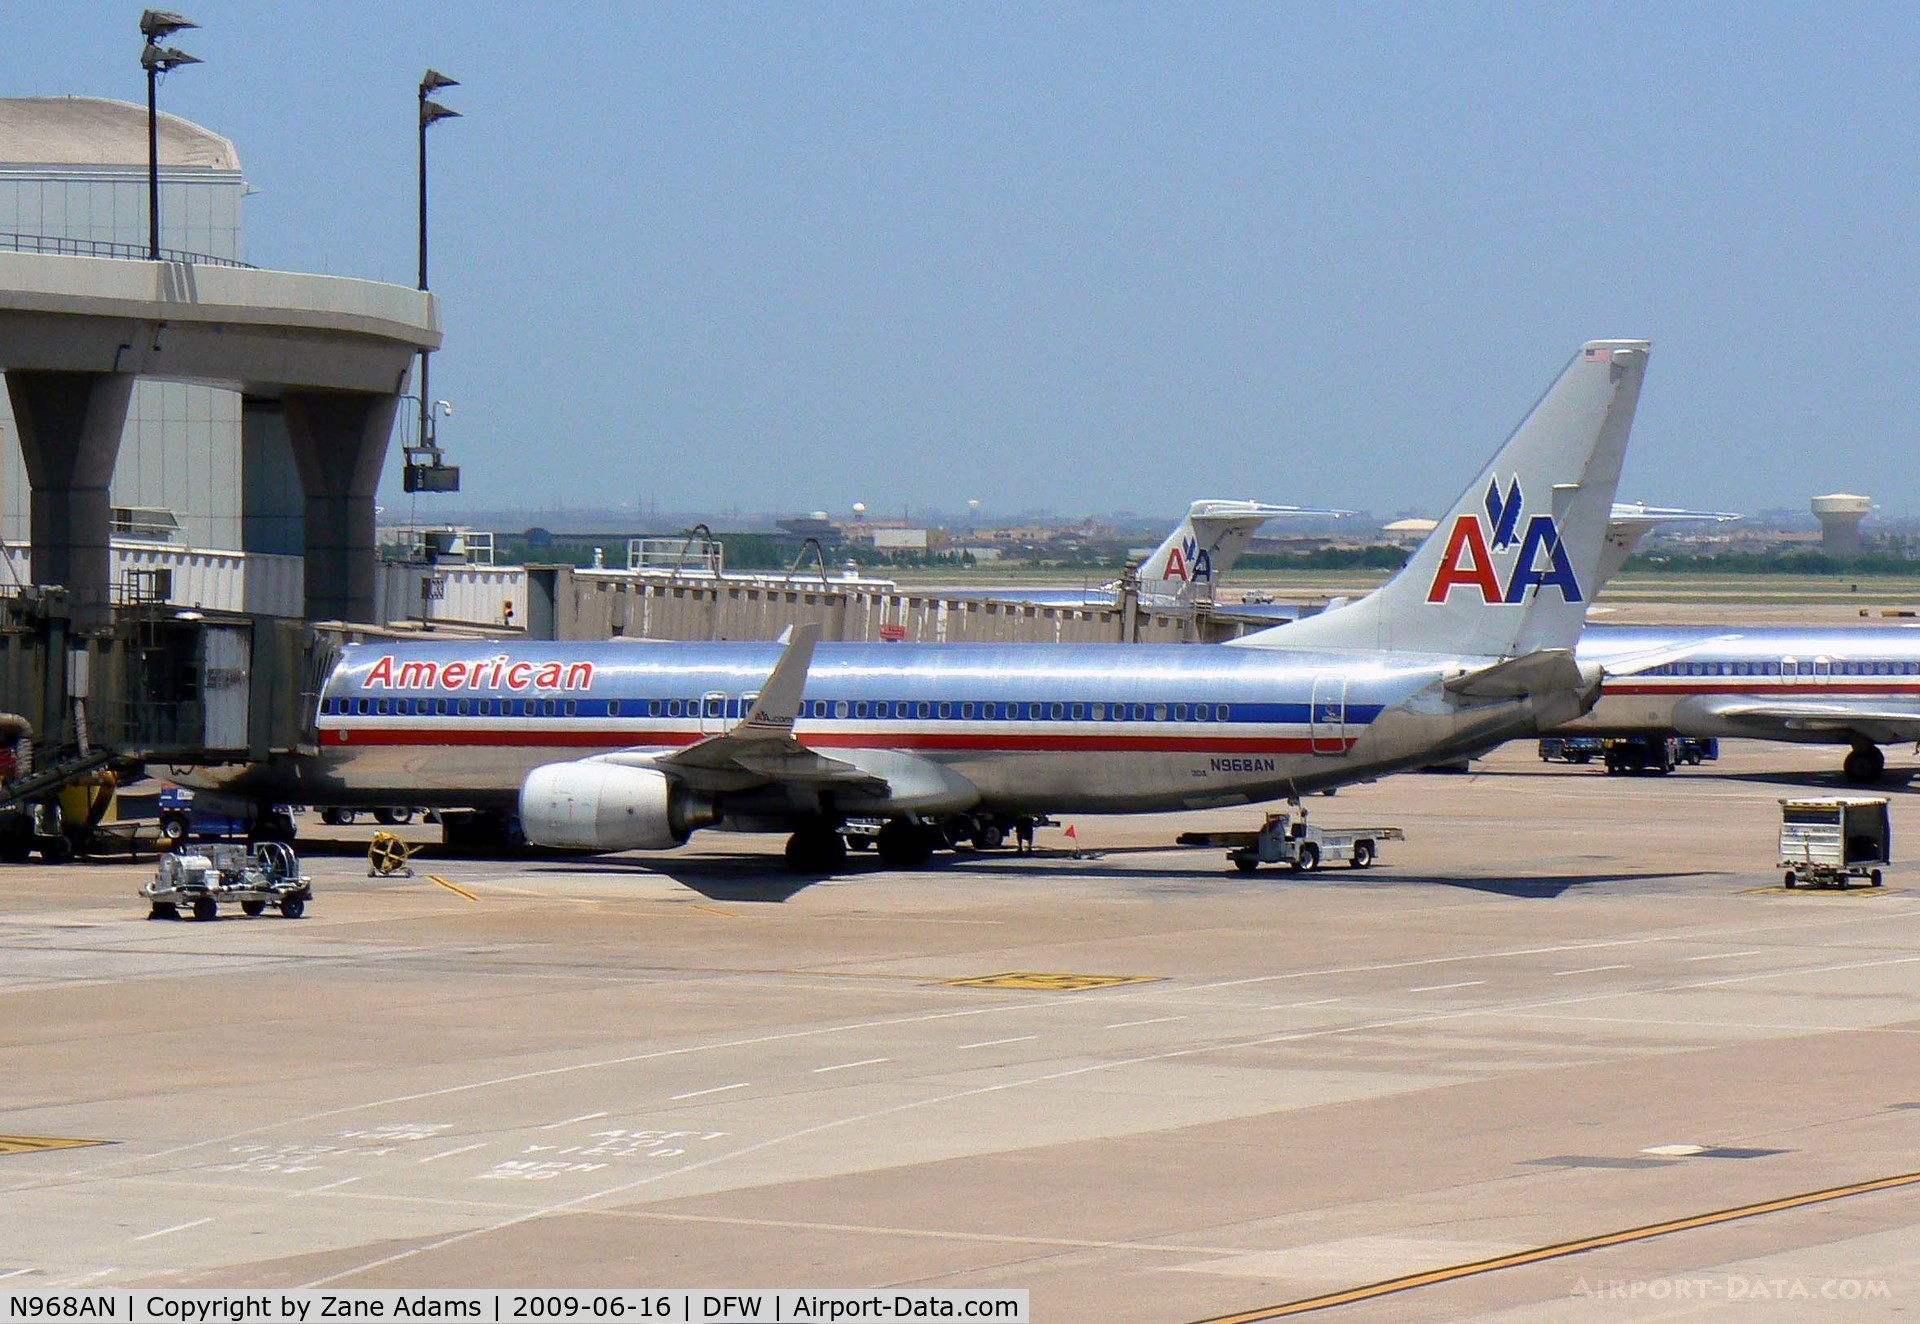 N968AN, 2001 Boeing 737-823 C/N 30095, American Airlines at the gate - DFW